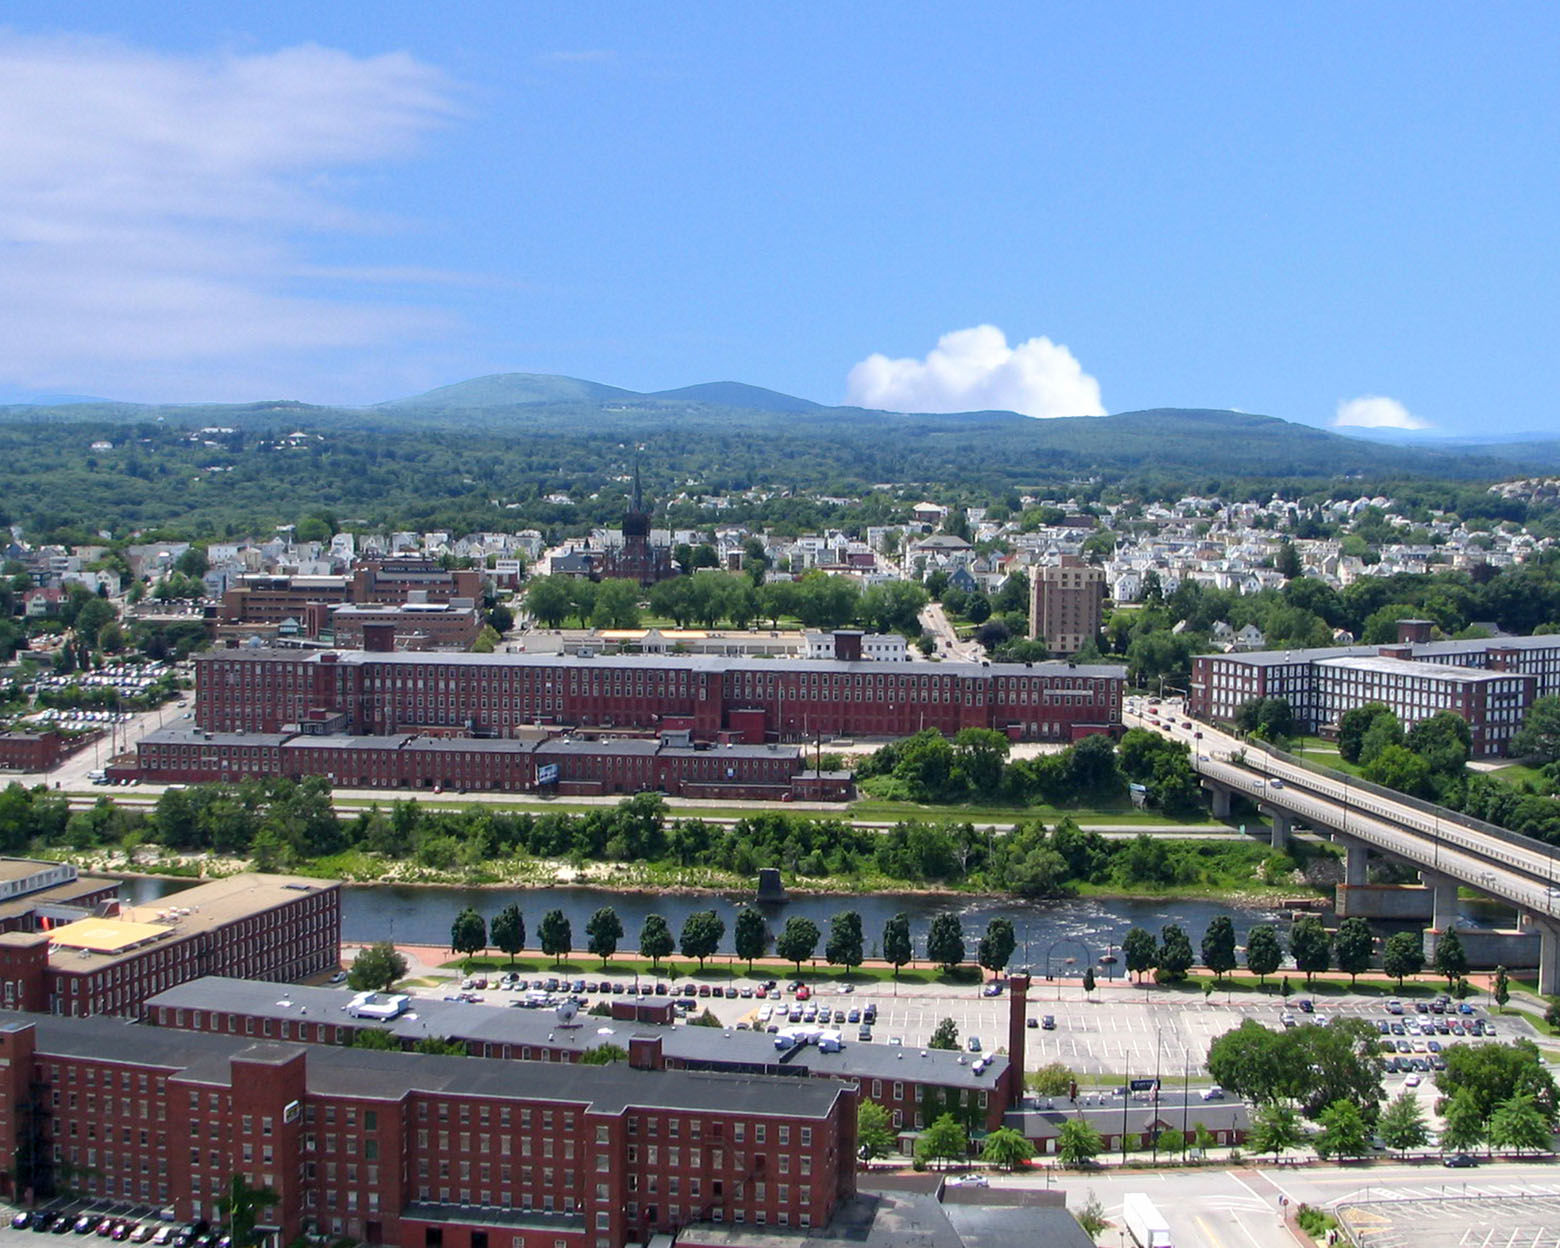 View of the Amoskeag Manufacturing mills in Manchester, New Hampshire.